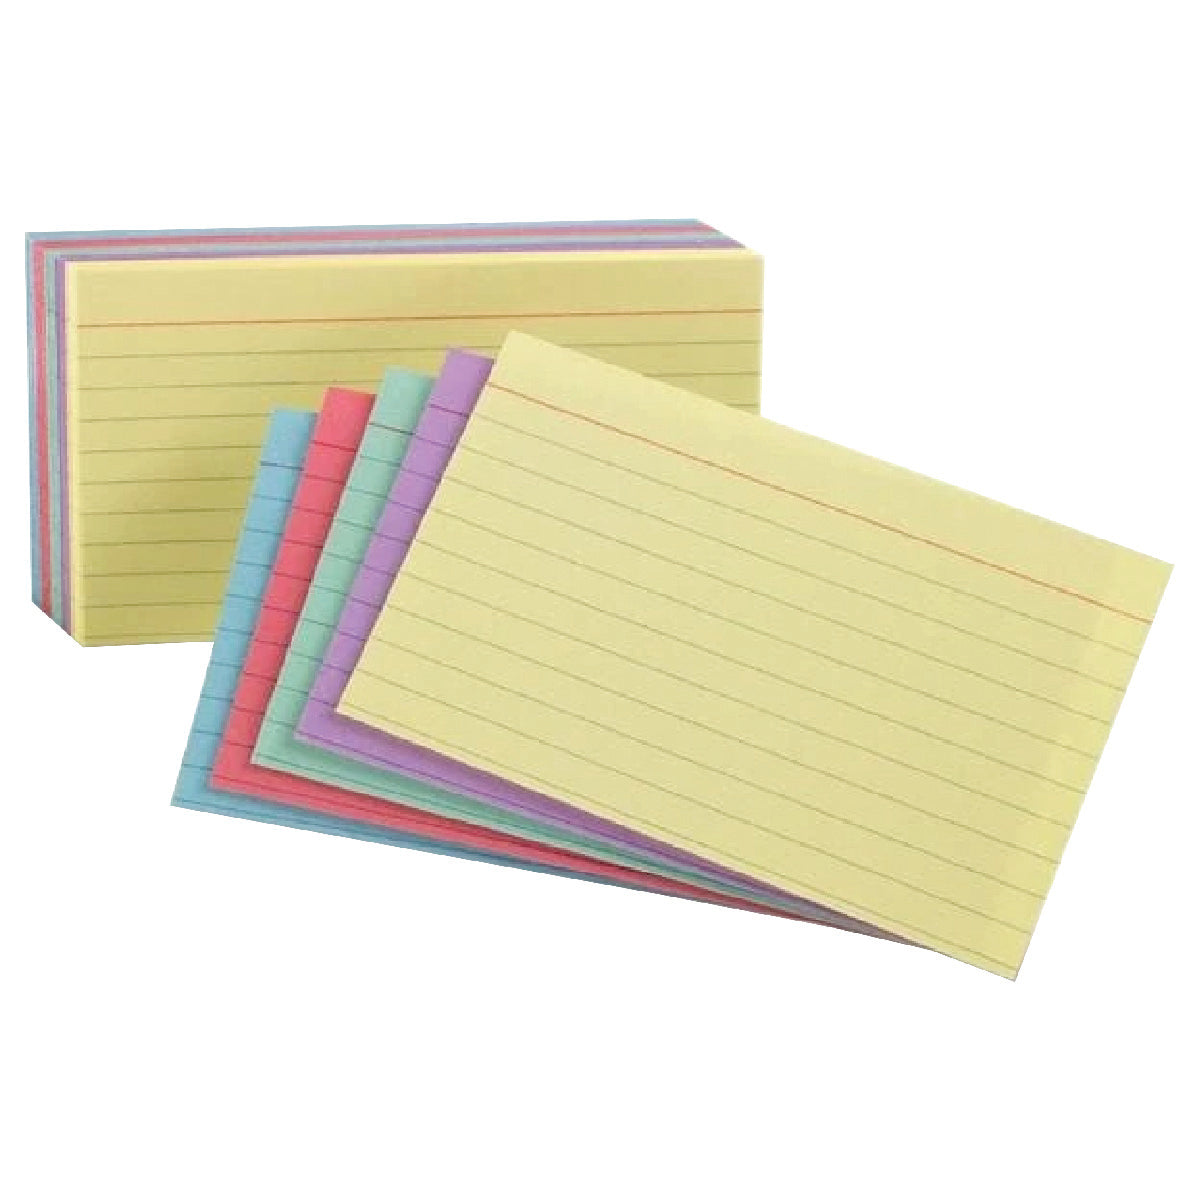 MESCO Index Cards 3x5 inches, 160gsm, 100sheets/pack, Colored